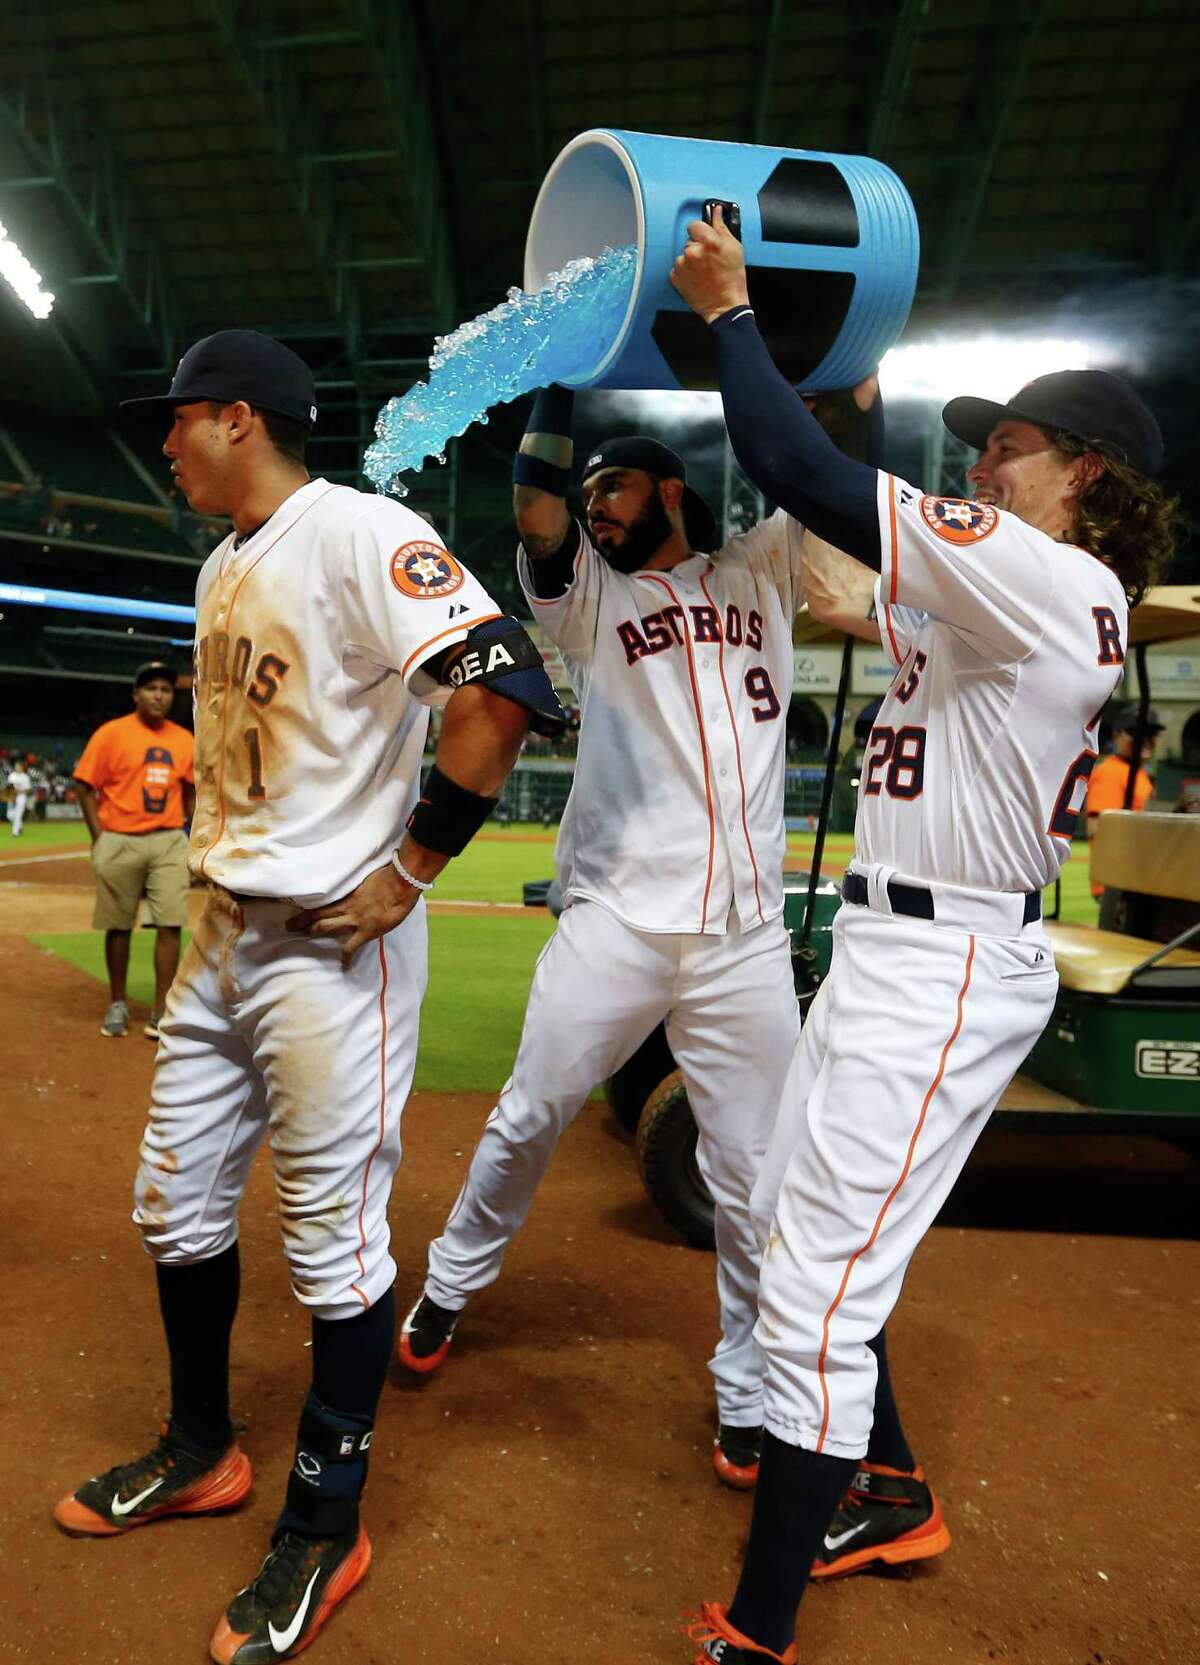 Houston Astros shortstop Carlos Correa (1) gets doused with Powerade by Marwin Gonzalez (9) and Colby Rasmus (28) after Correa's single scored the winning run during the thirteenth inning of an MLB game at Minute Maid Park on Wednesday, Aug. 19, 2015, in Houston.